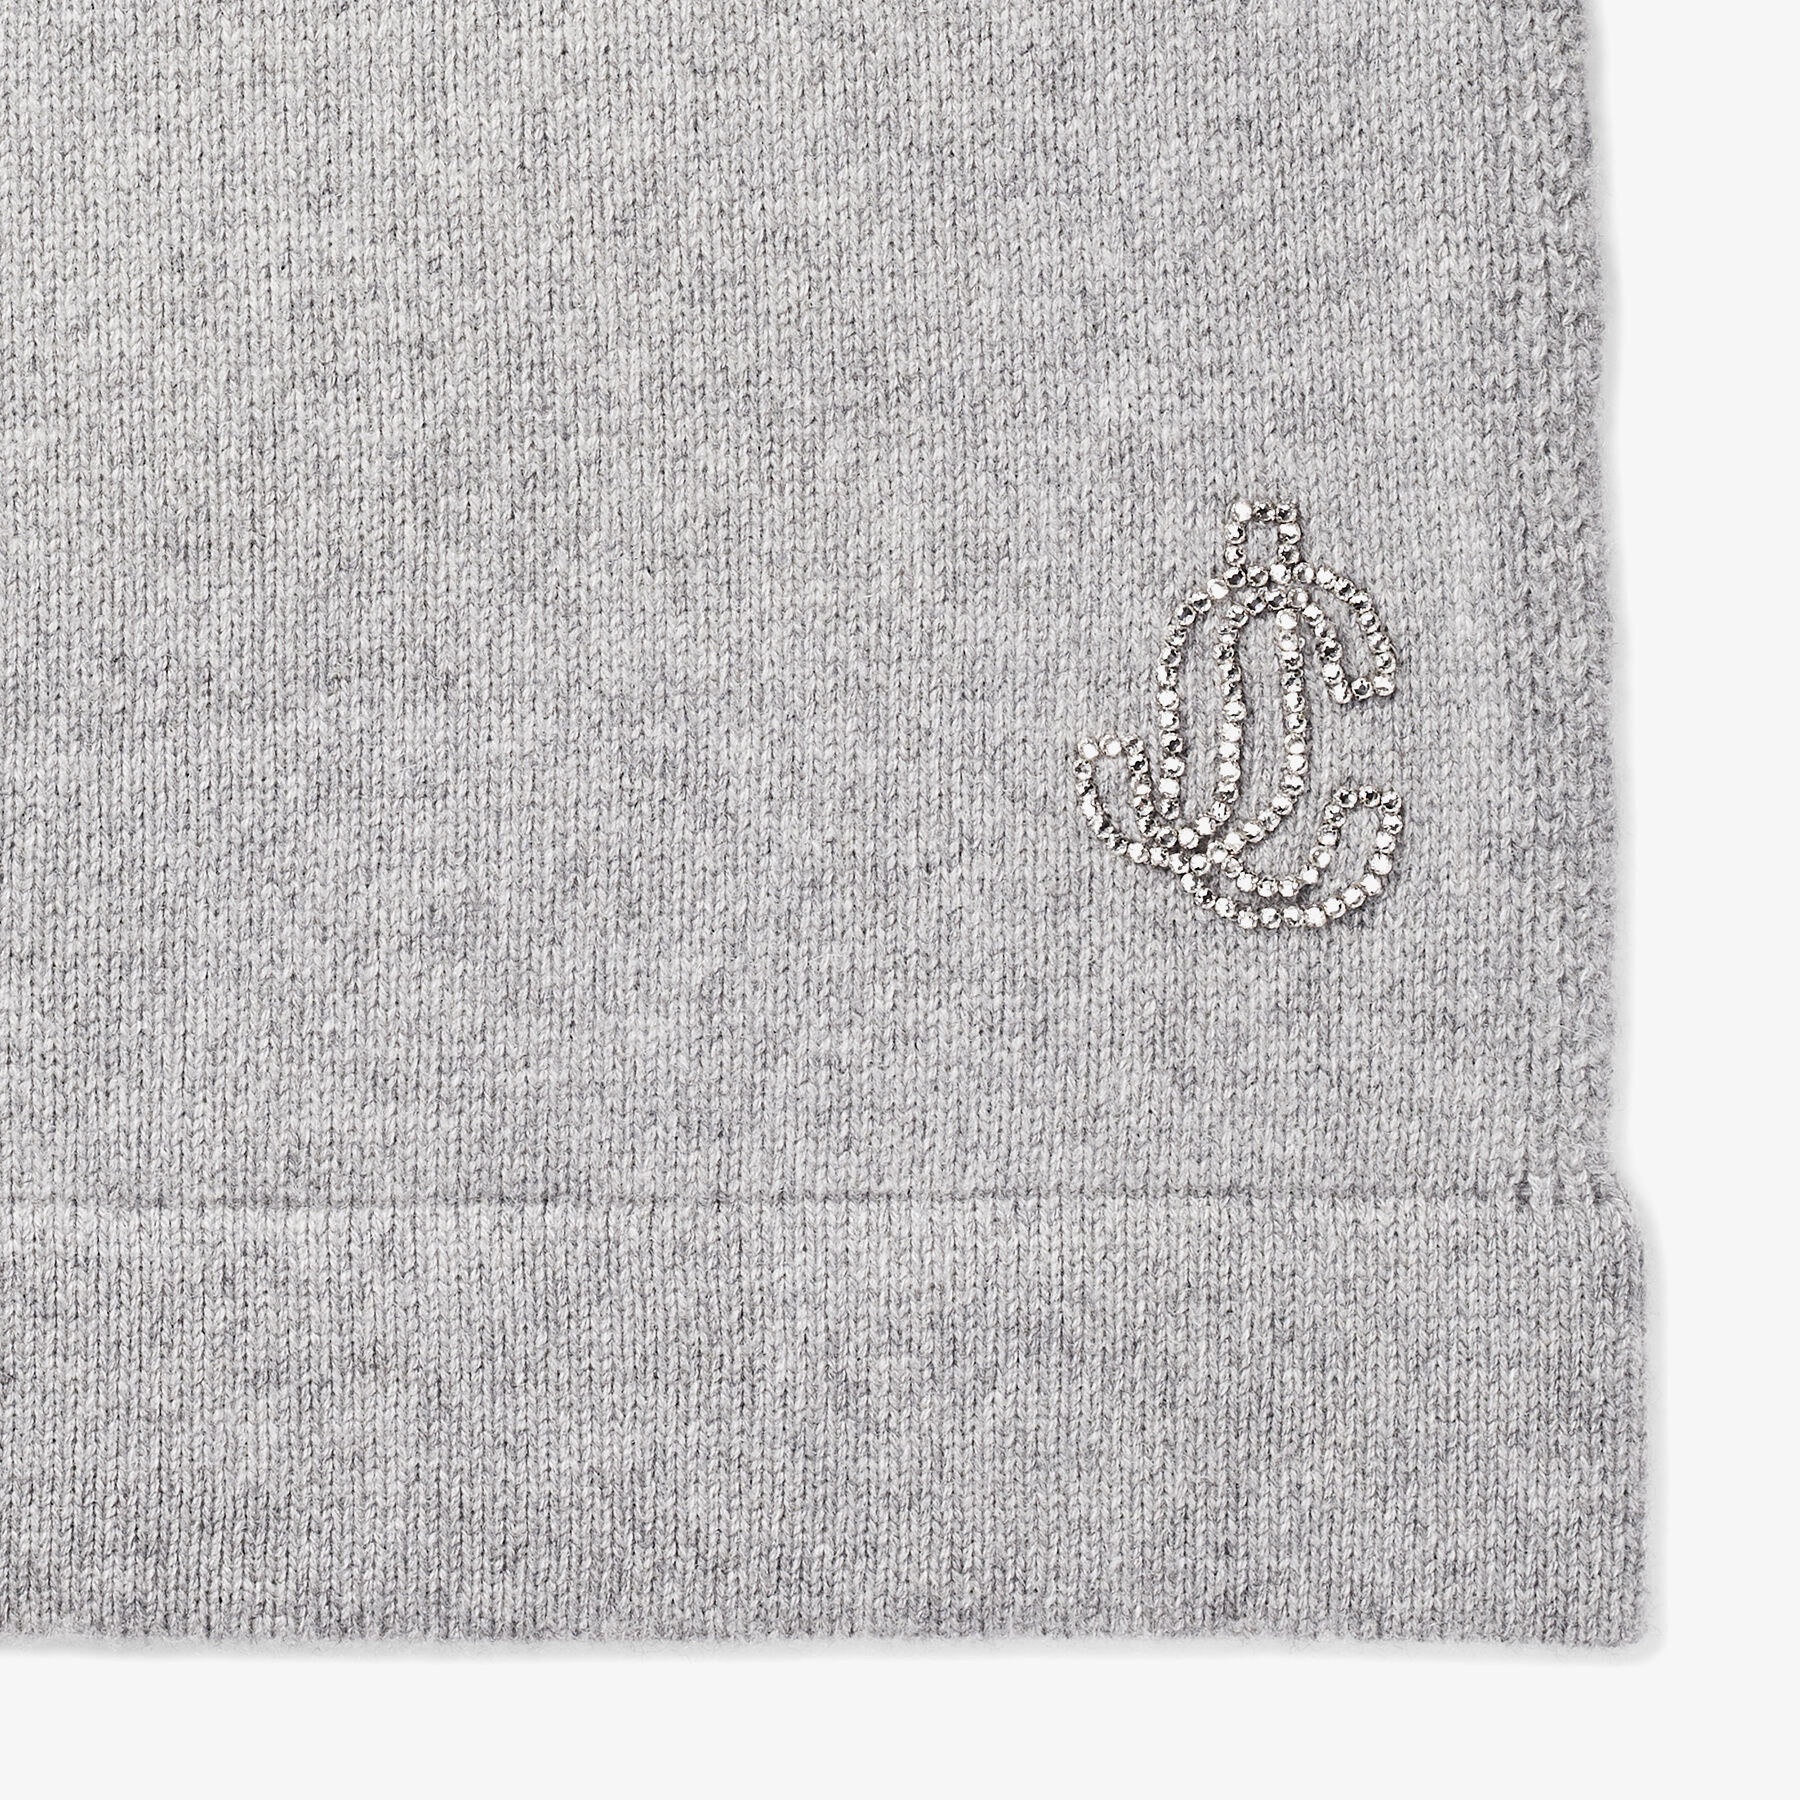 Imke
Marl Grey Knitted Cashmere Scarf with Embroidered Crystal JC Monogram - 3